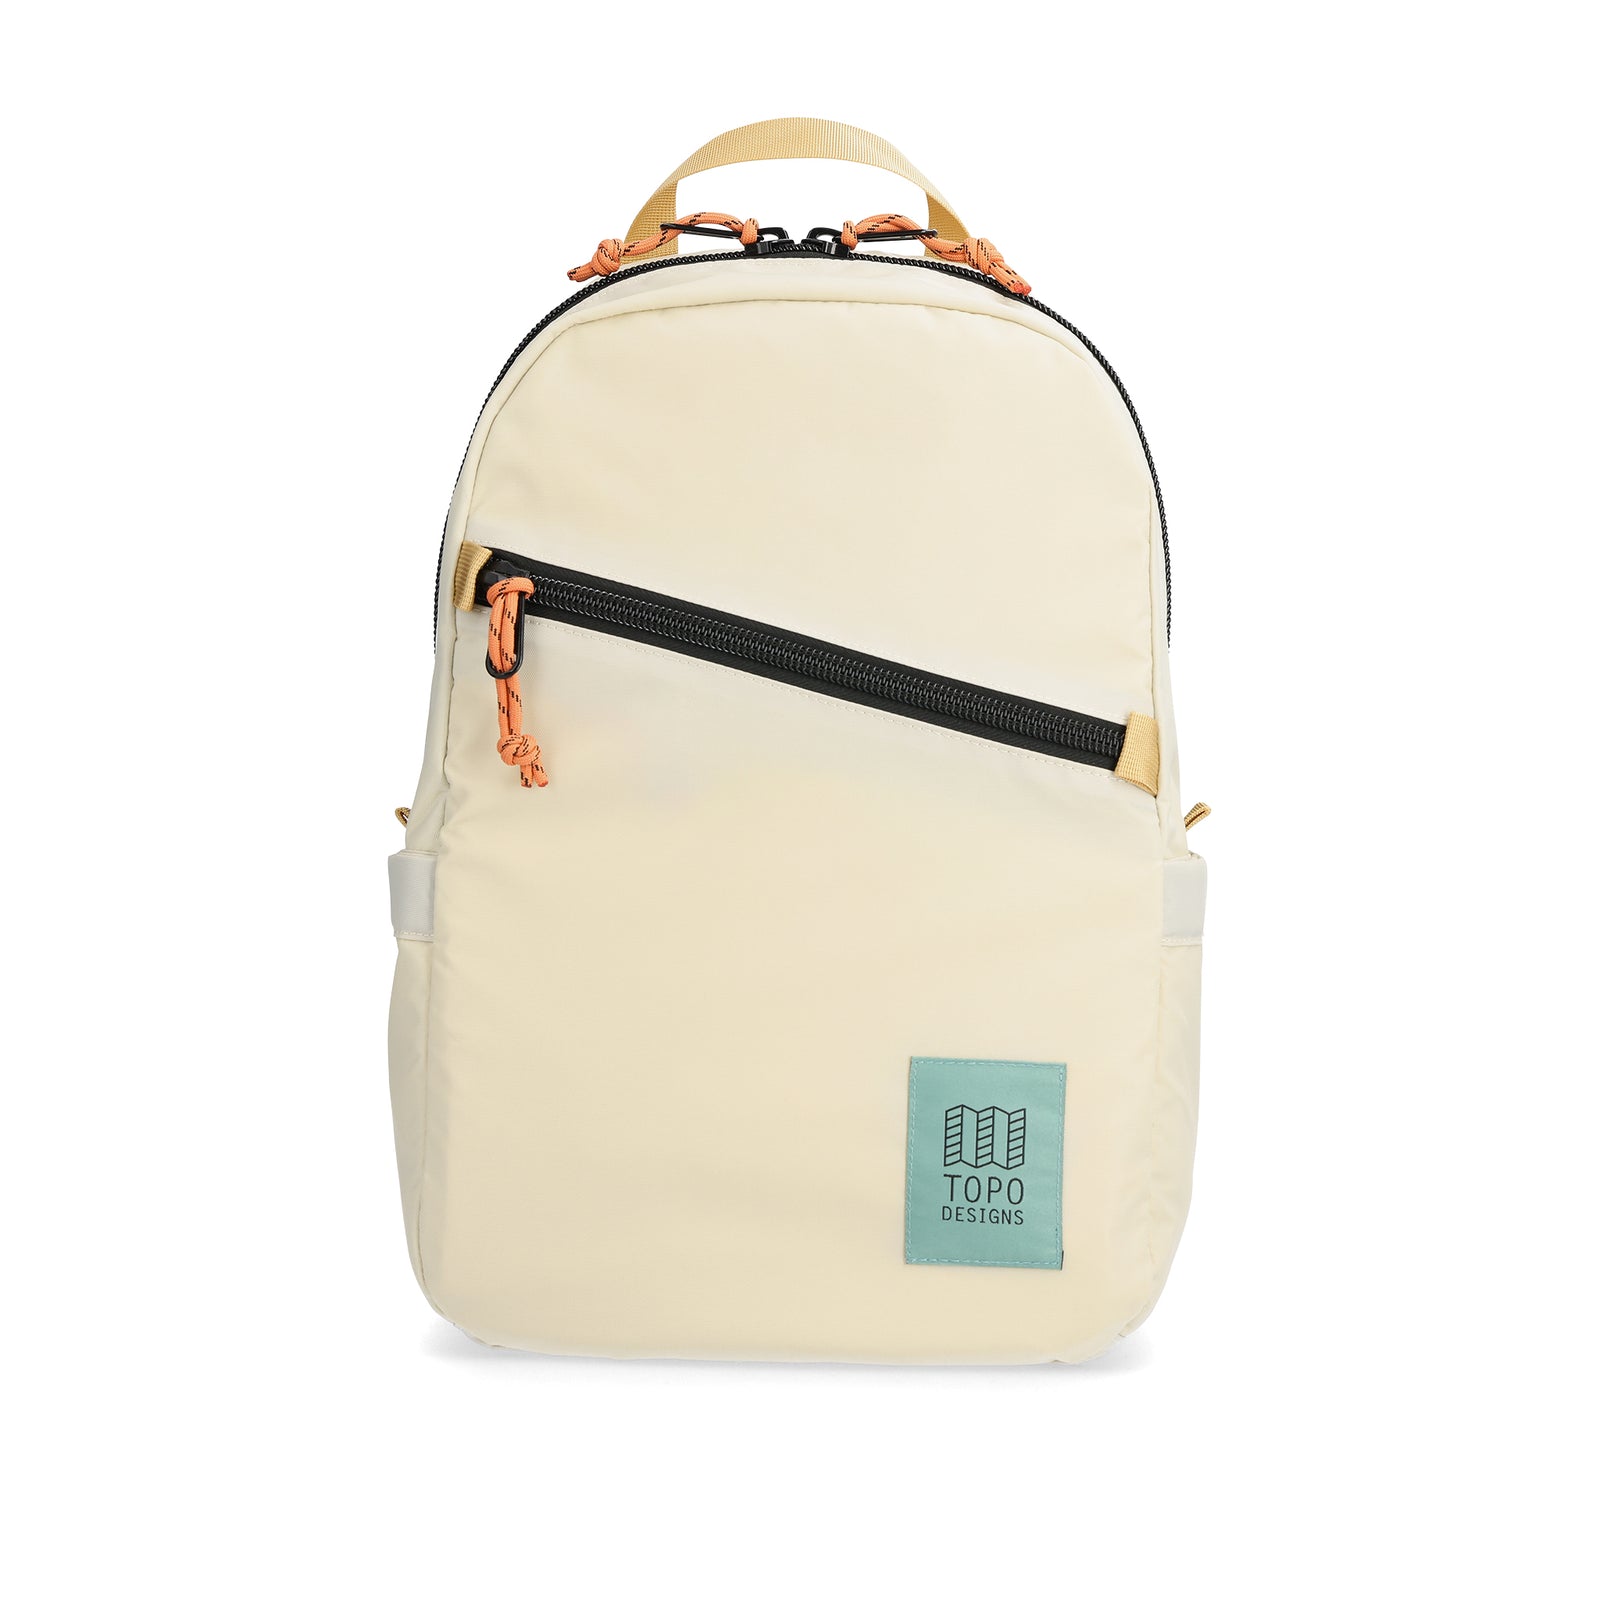 Front View of Topo Designs Light Pack in "Bone White"